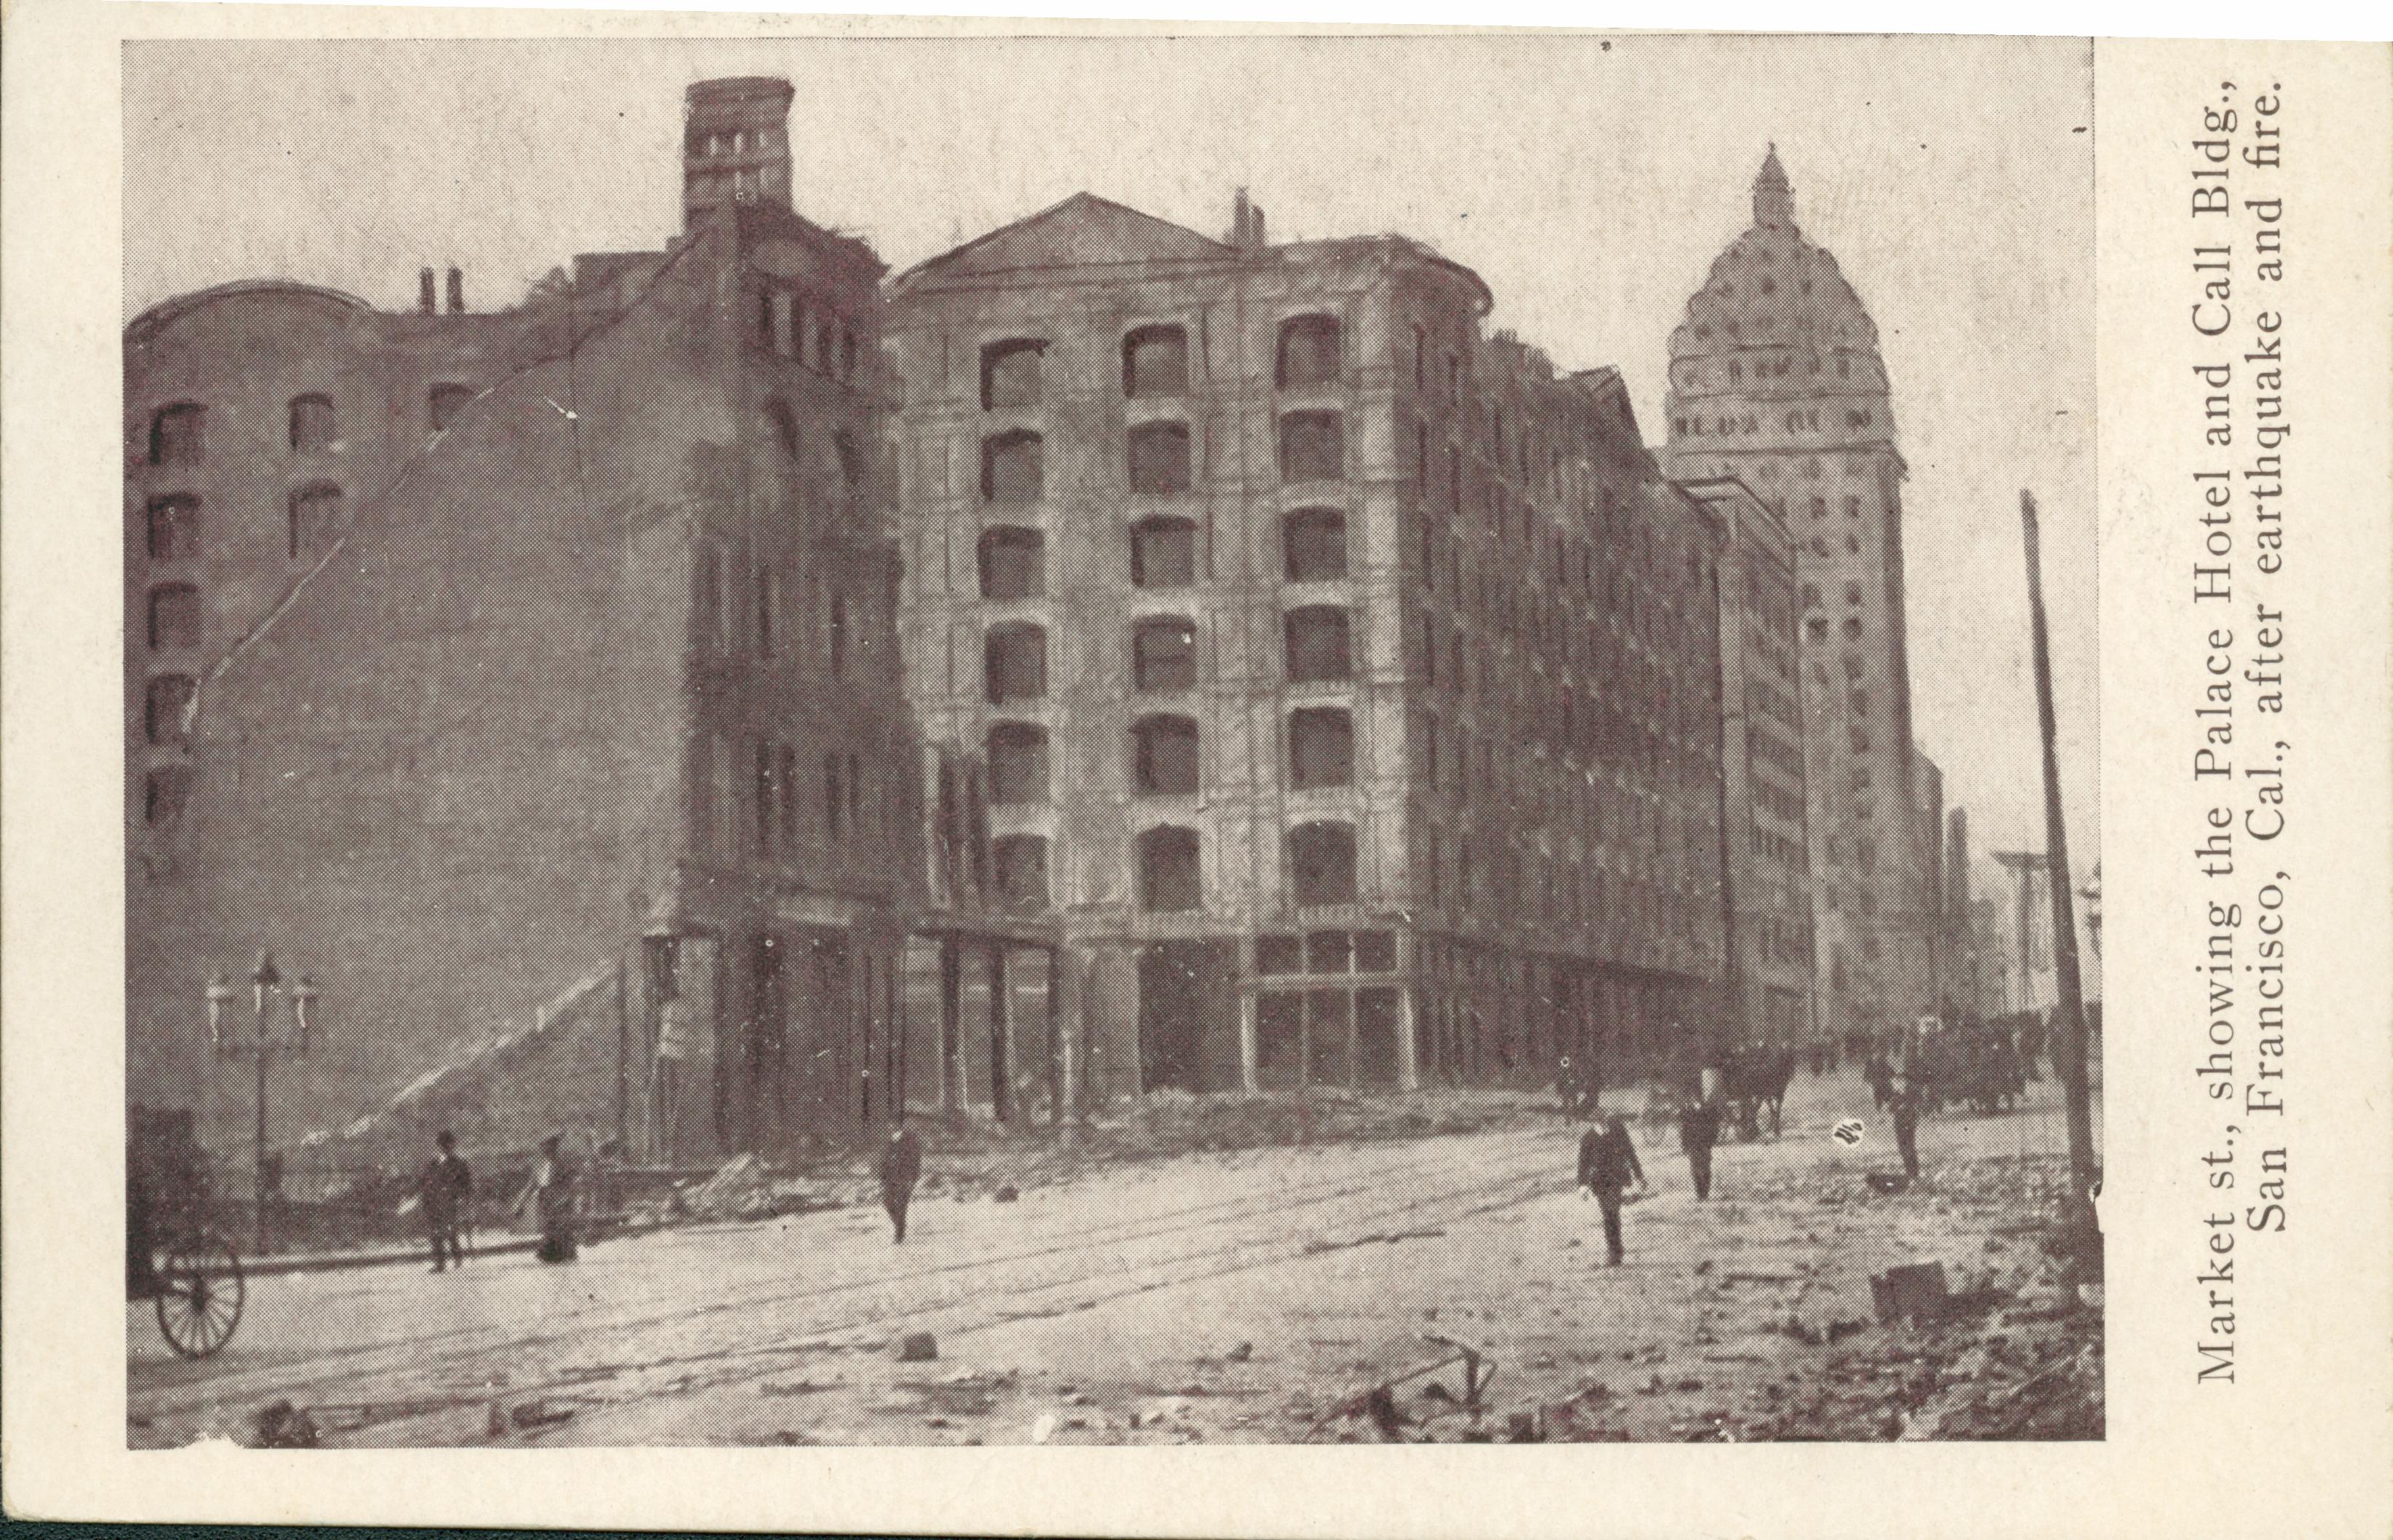 Shows the call Building and Palace Hotel along Market street with a ruined building in the foreground.